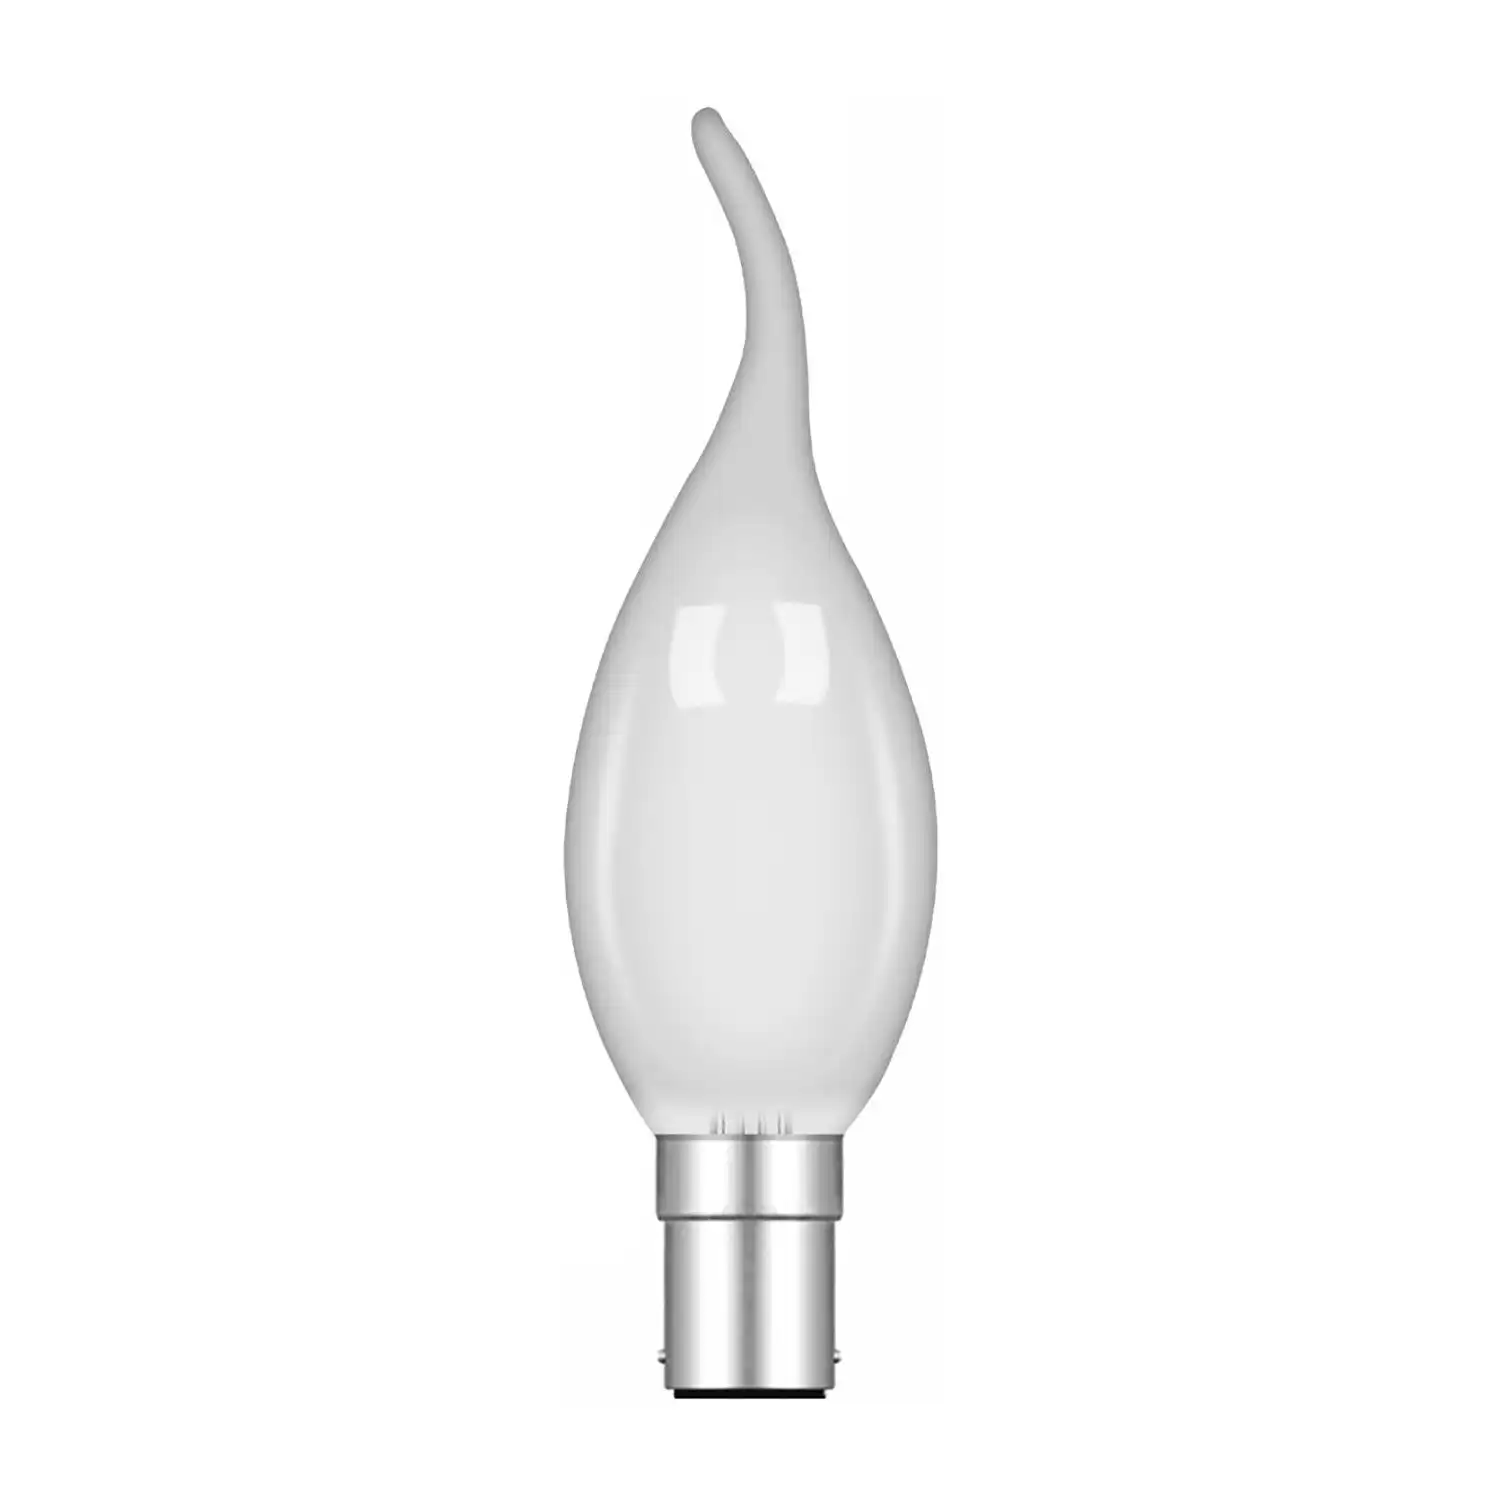 Candle Tip B15D Frosted 60W Incandescent T (100 10)